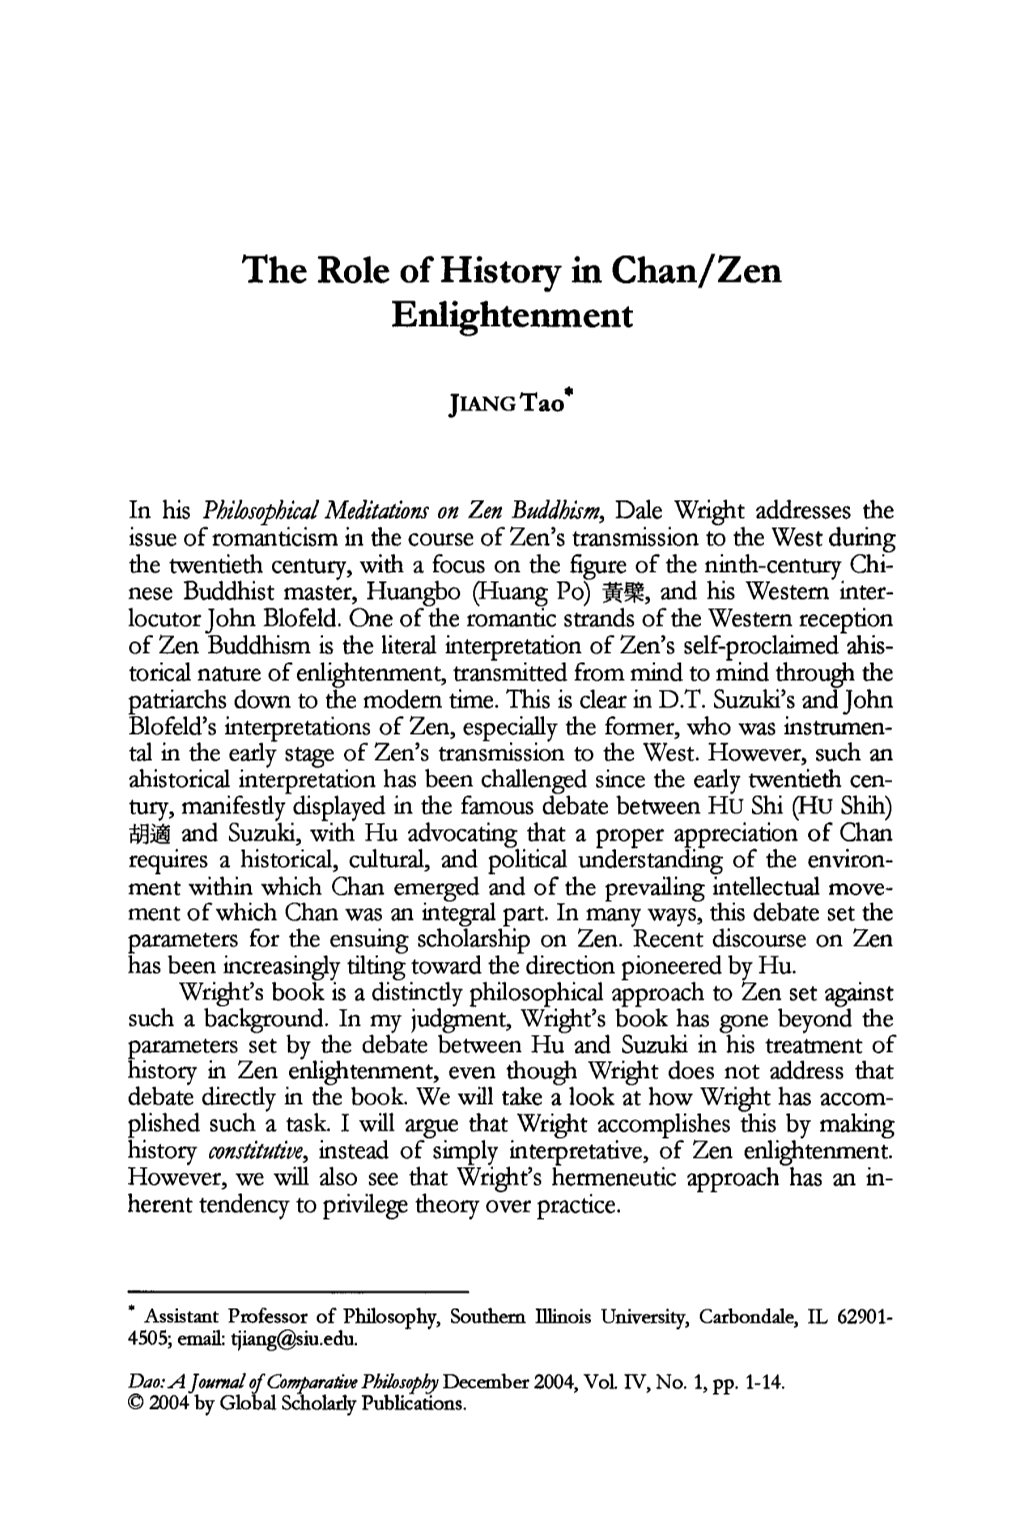 The Role of History in Chan/Zen Enlightenment